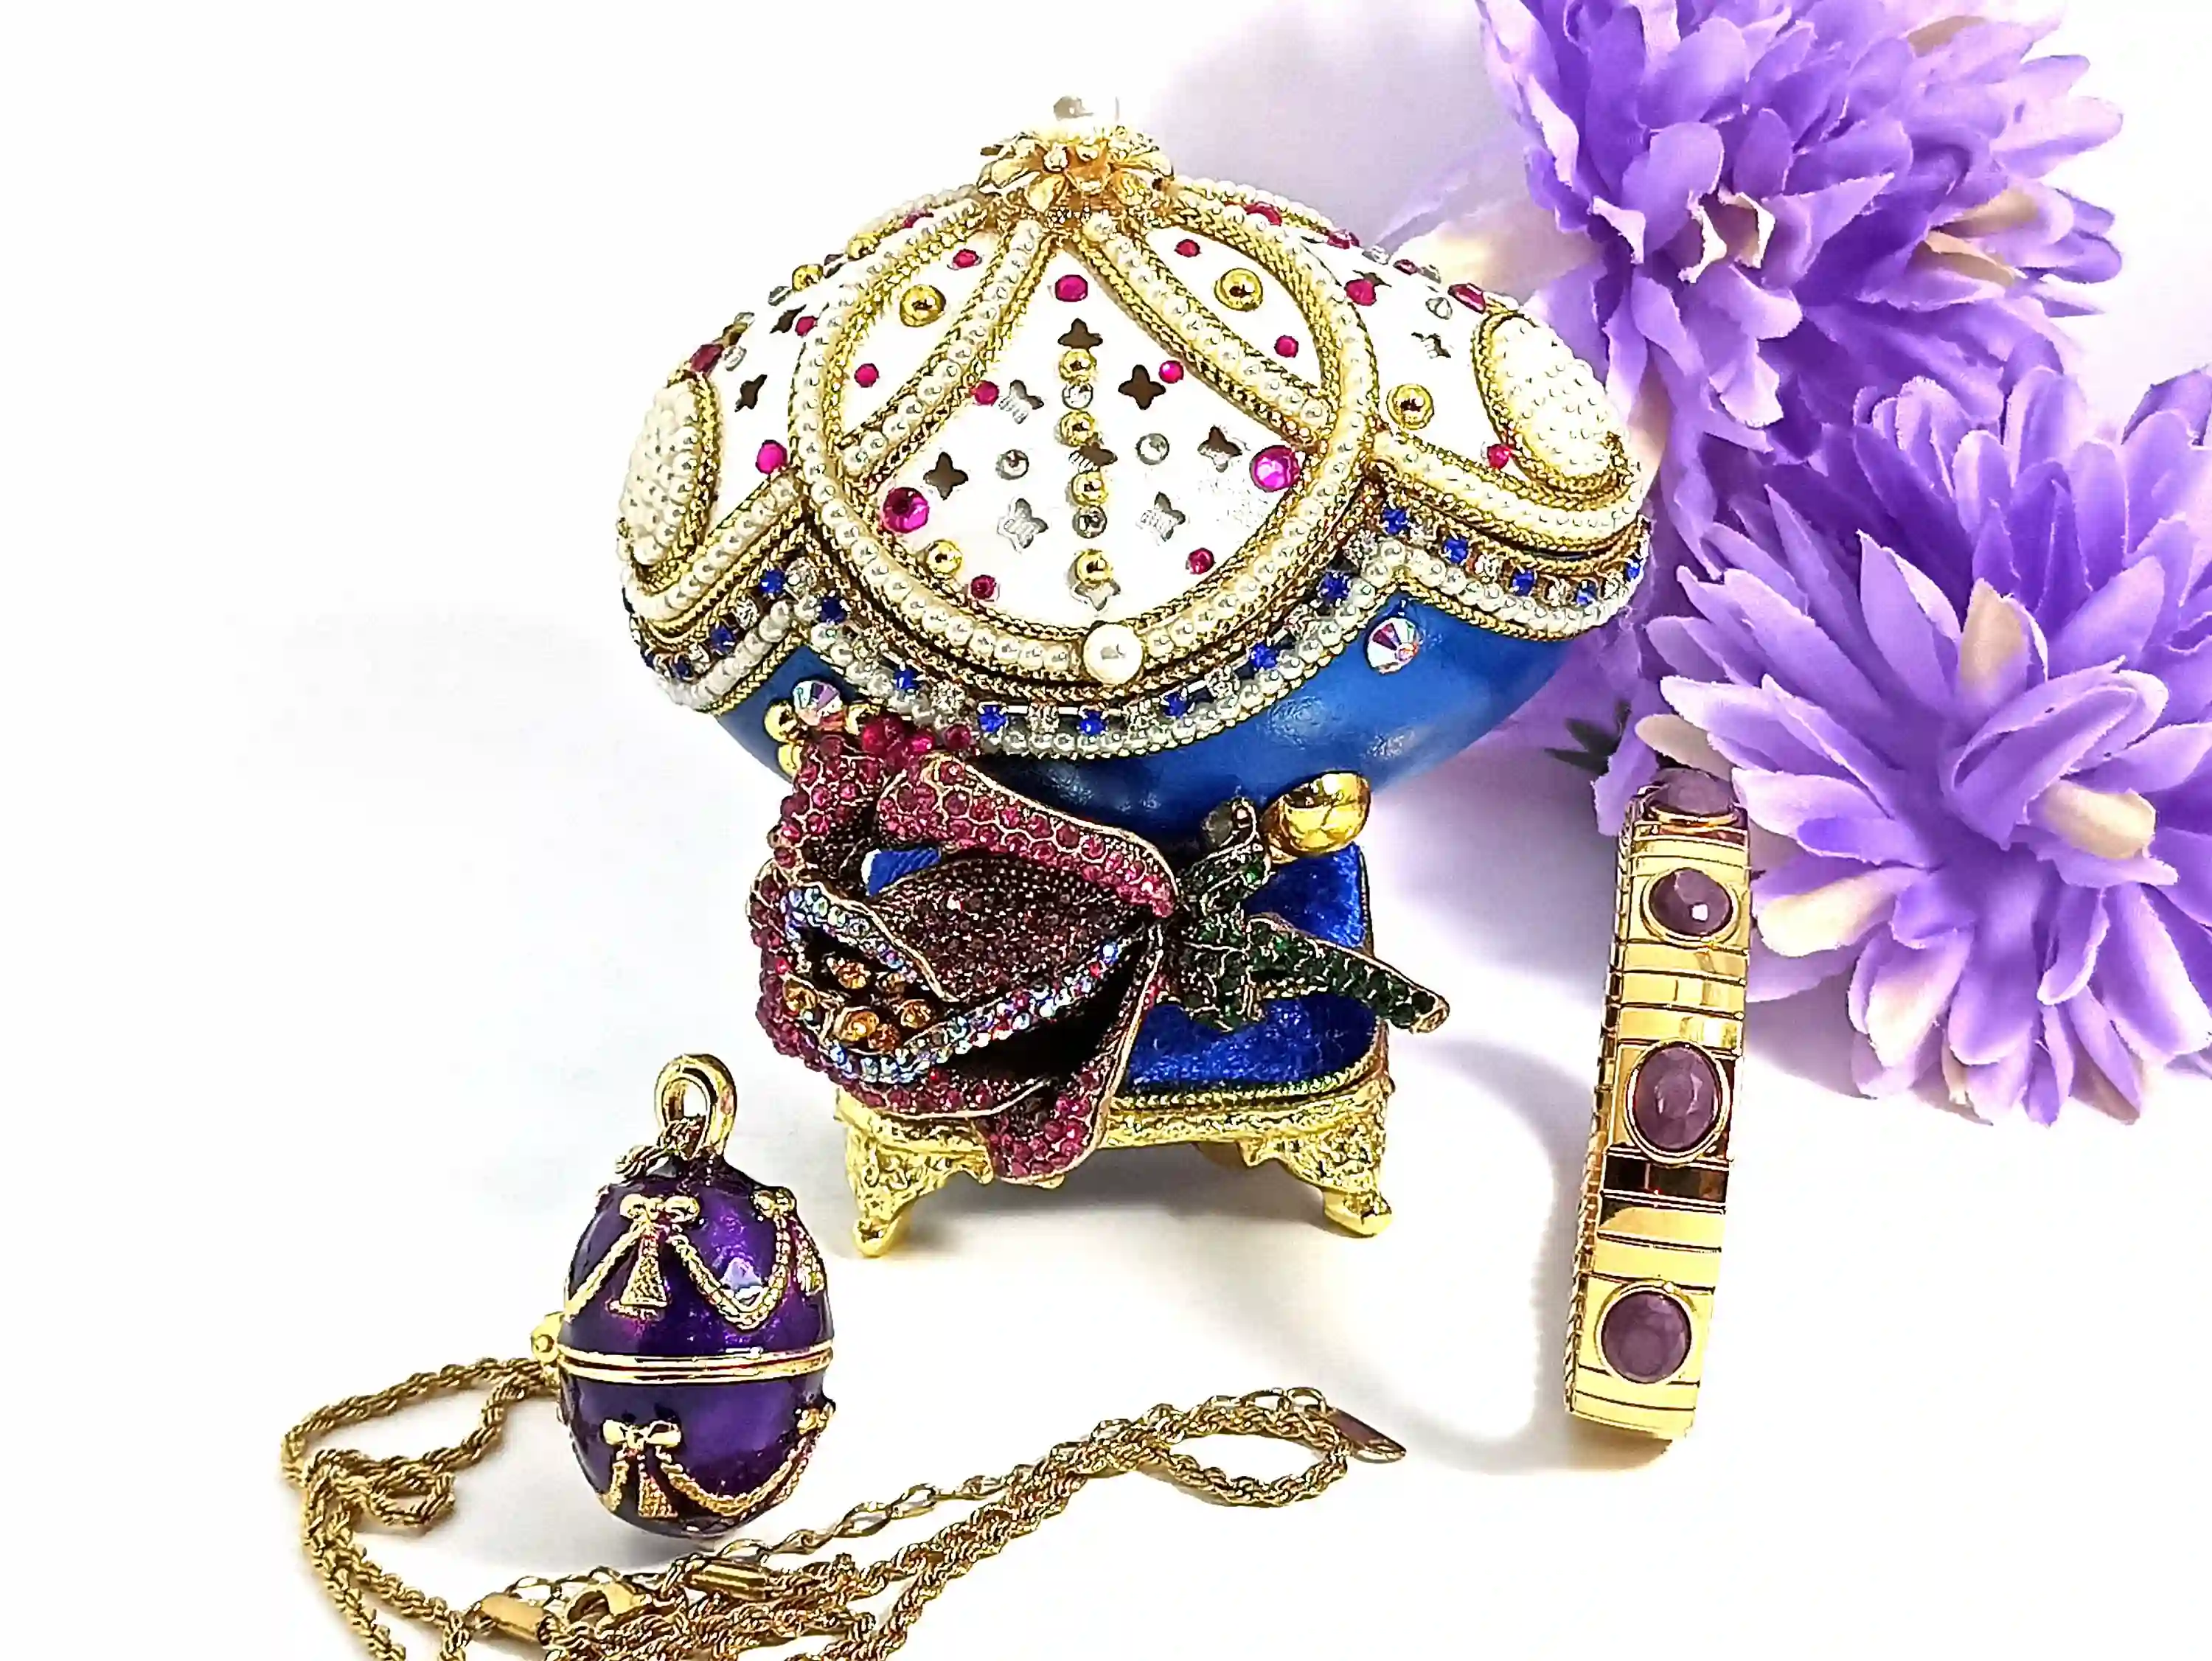 Amethyst, Faberge Music Box- REAL Egg Luxury Valentine MASTERPIECE Faberge Egg style Imperial Art Nouveau Jewelry Box , Faberge egg, 24kGold 